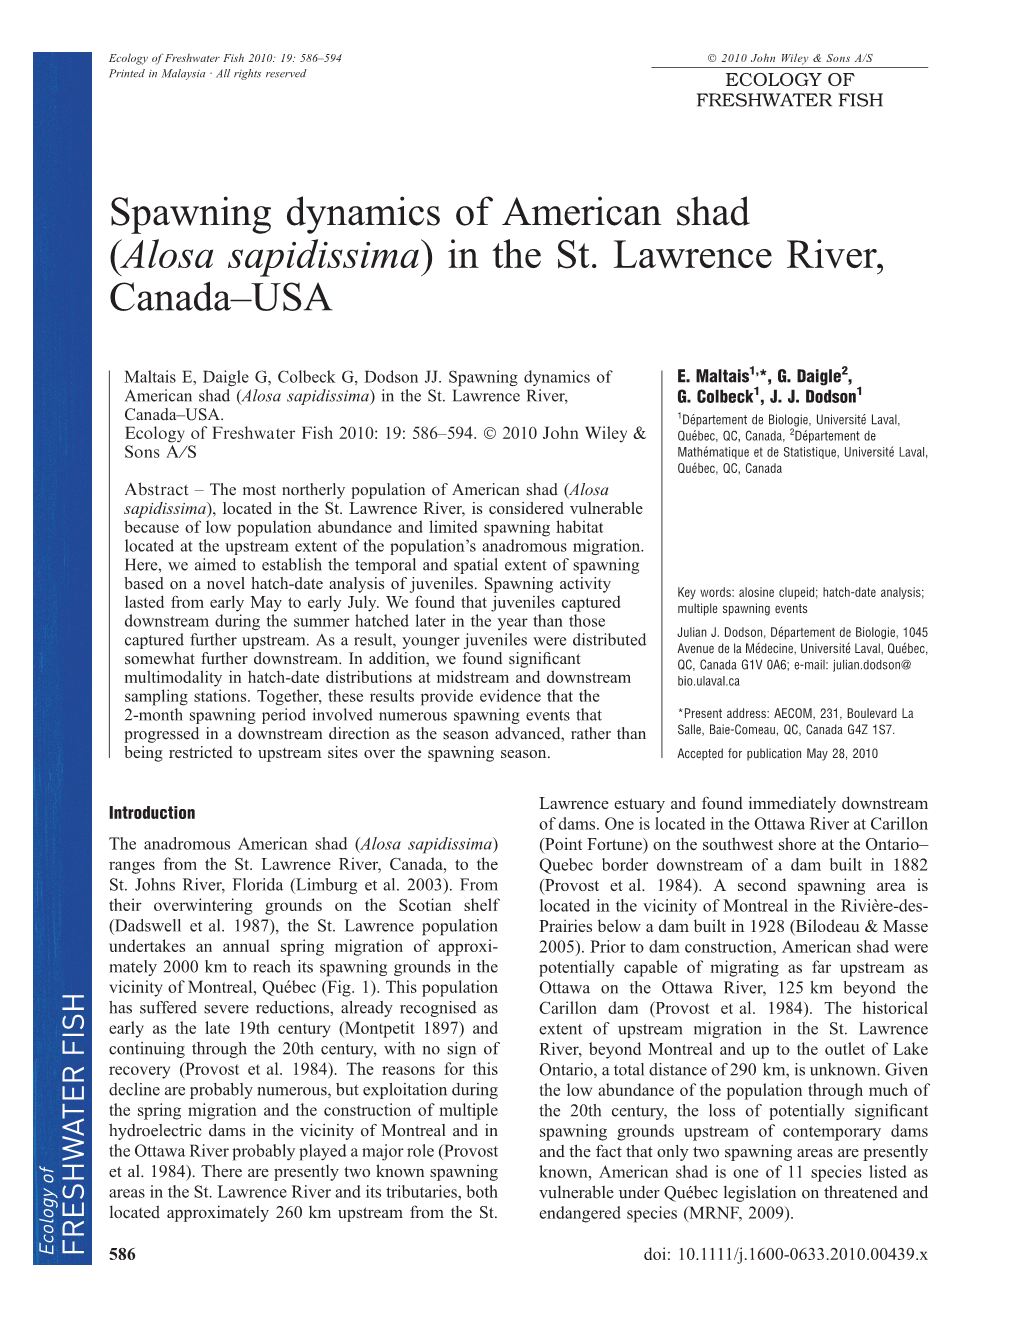 Spawning Dynamics of American Shad (Alosa Sapidissima) in the St. Lawrence River, Canadausa